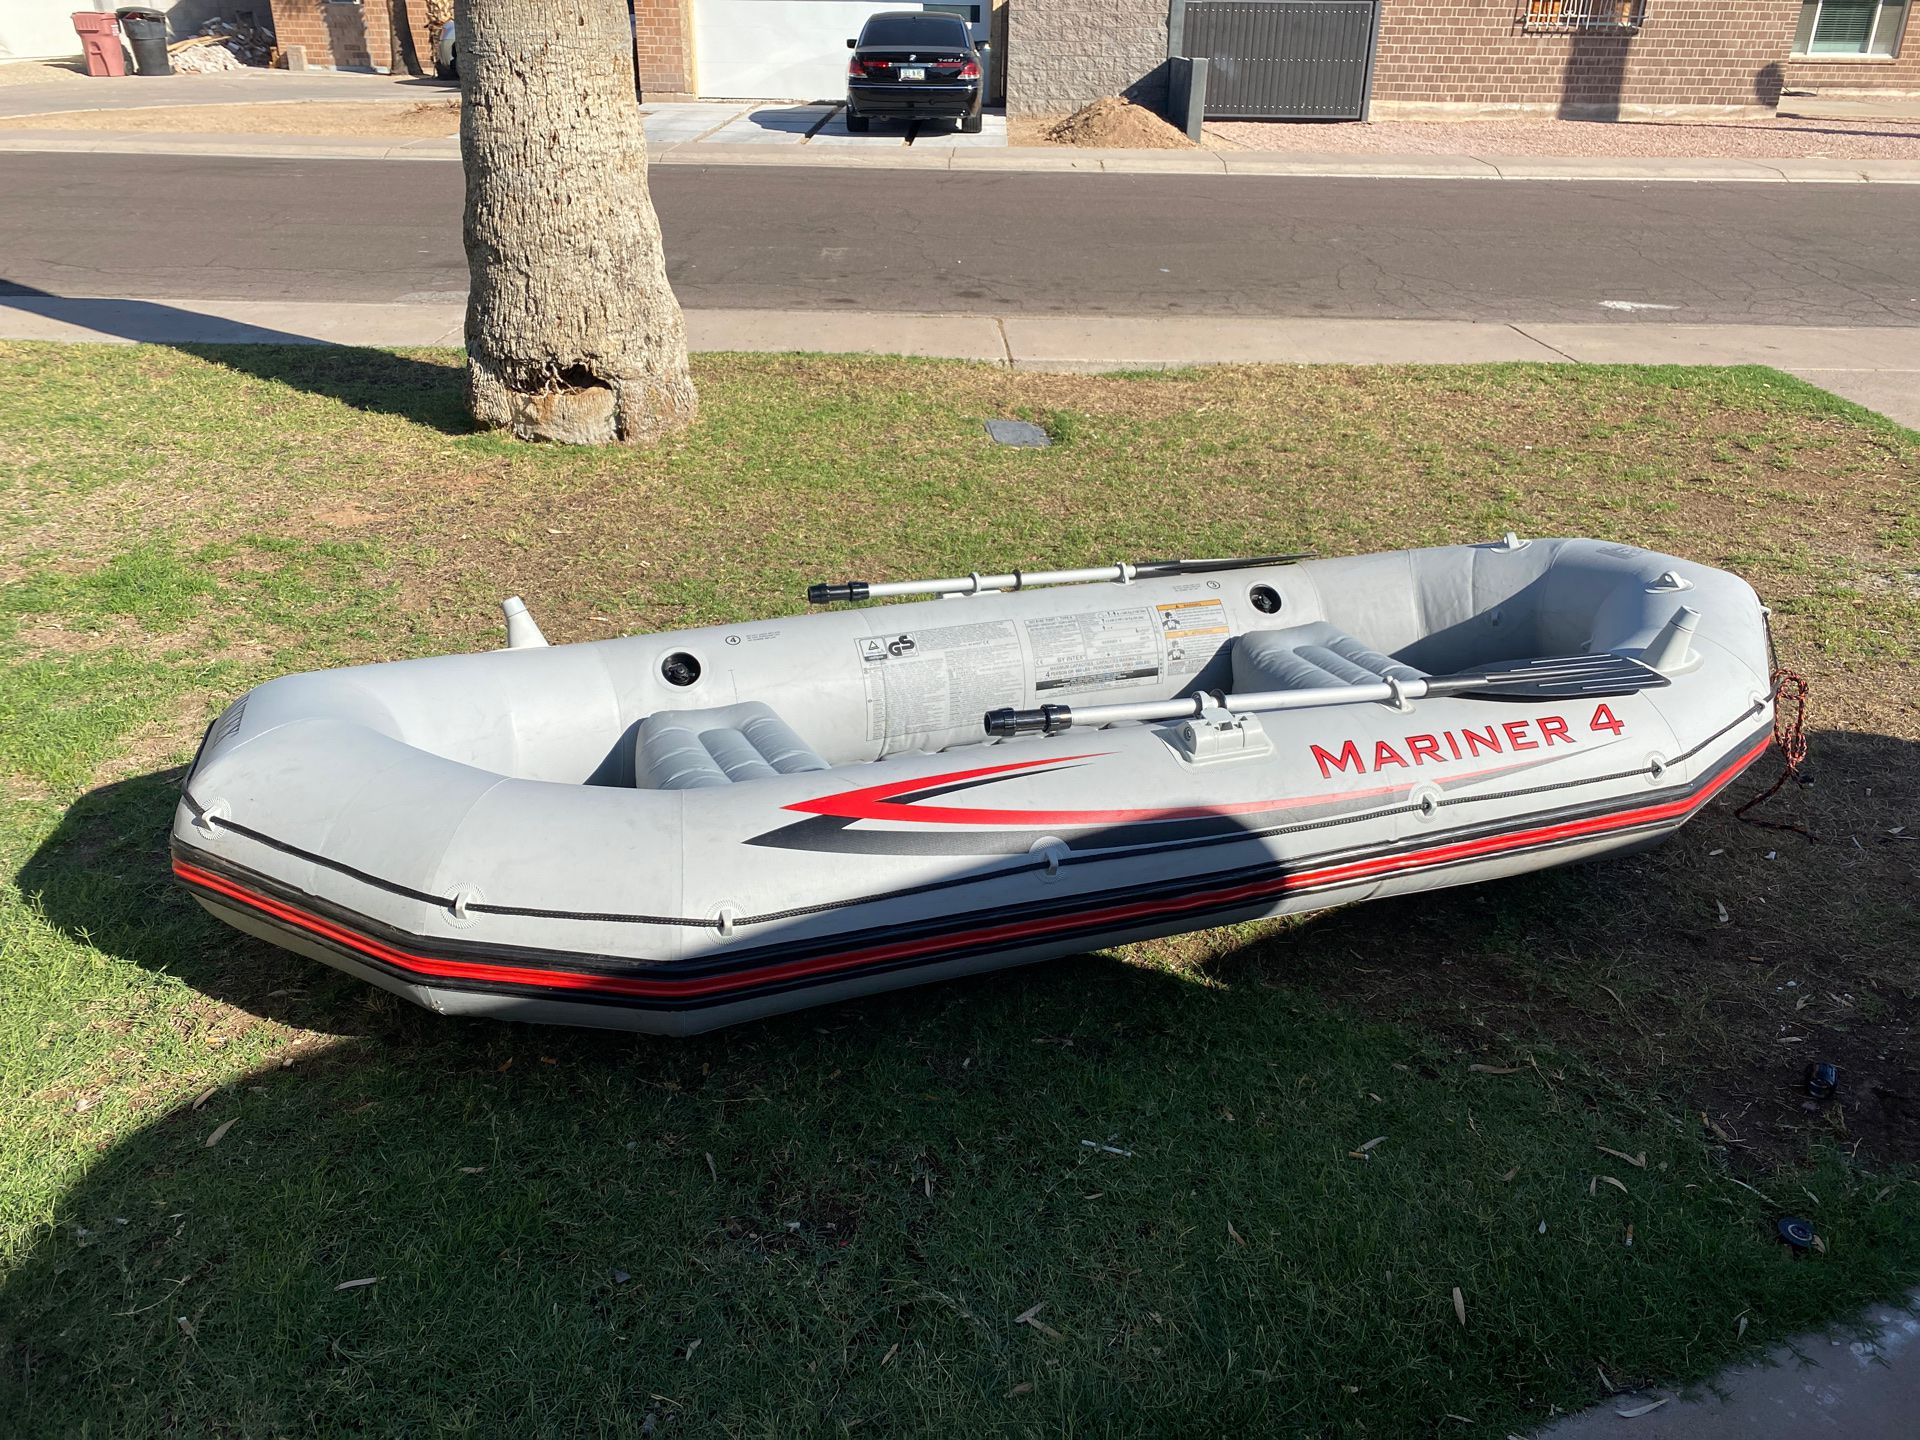 Mariner 4 inflatable boat by intex